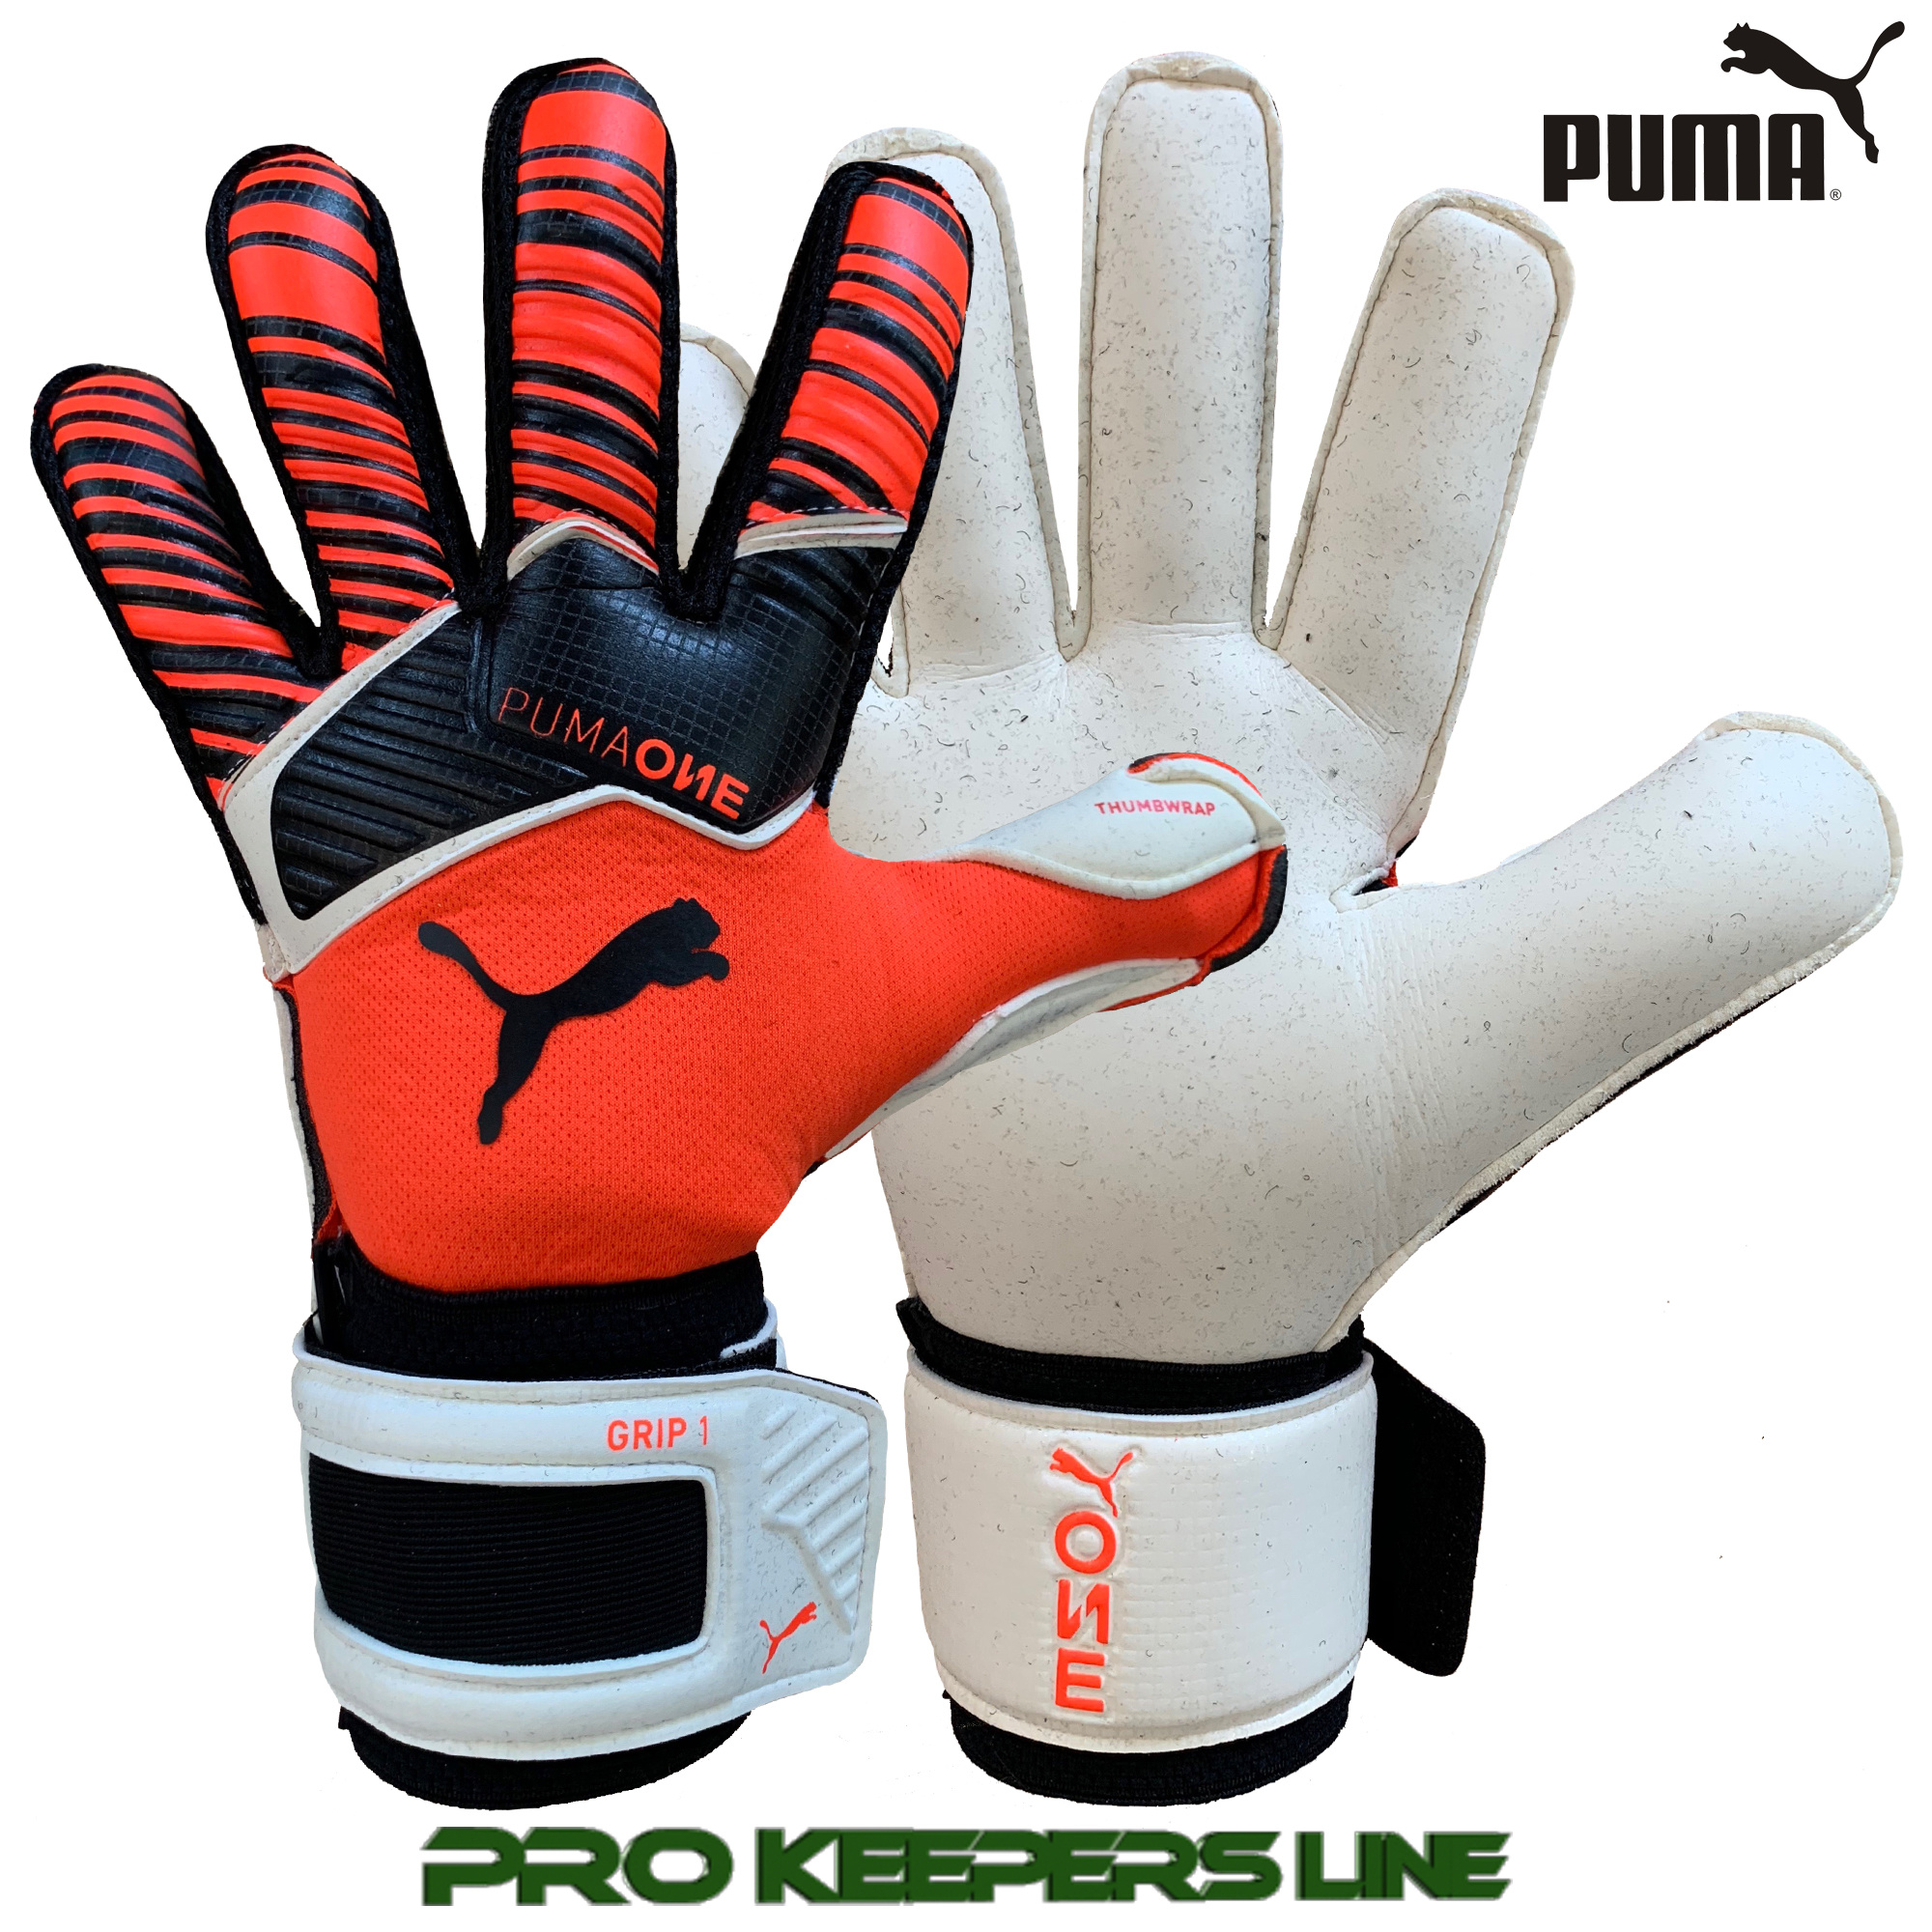 PUMA ONE GRIP 1 RC ENERGY RED - Pro 